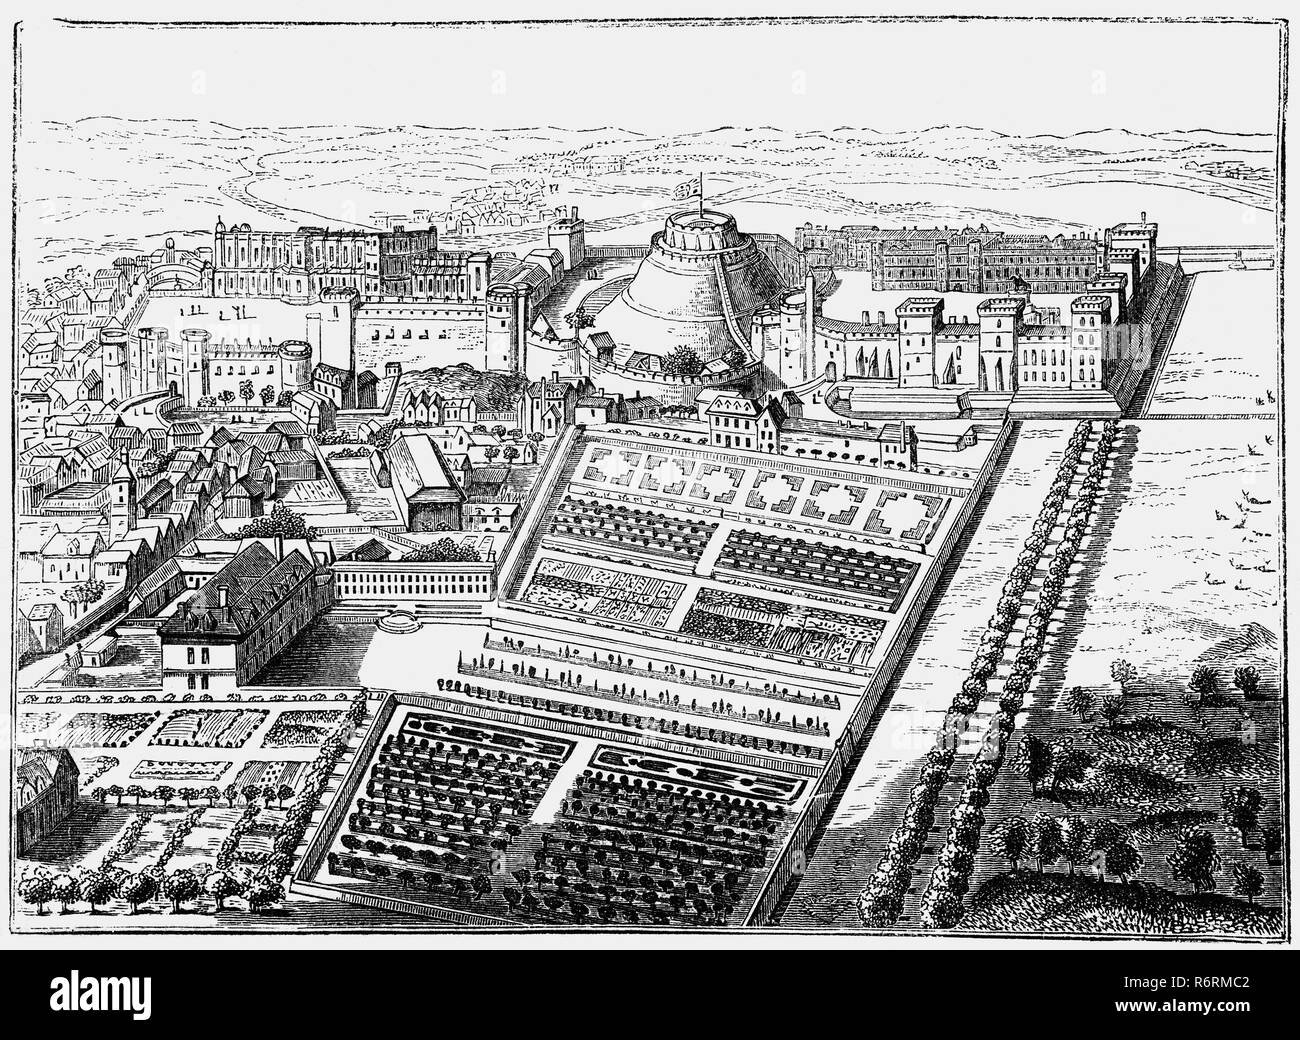 An 18th Century aerial plan of Windsor Palace, Berkshire, England  following the Restoration of the monarchy in 1660 when King Charles II created 'the most extravagantly Baroque interiors ever executed in England'. Later in the 18th Century, Queen Anne attempted to address the lack of a formal garden by instructing Henry Wise to begin work on the Maestricht Garden beneath the North Terrace, which was never completed. Stock Photo